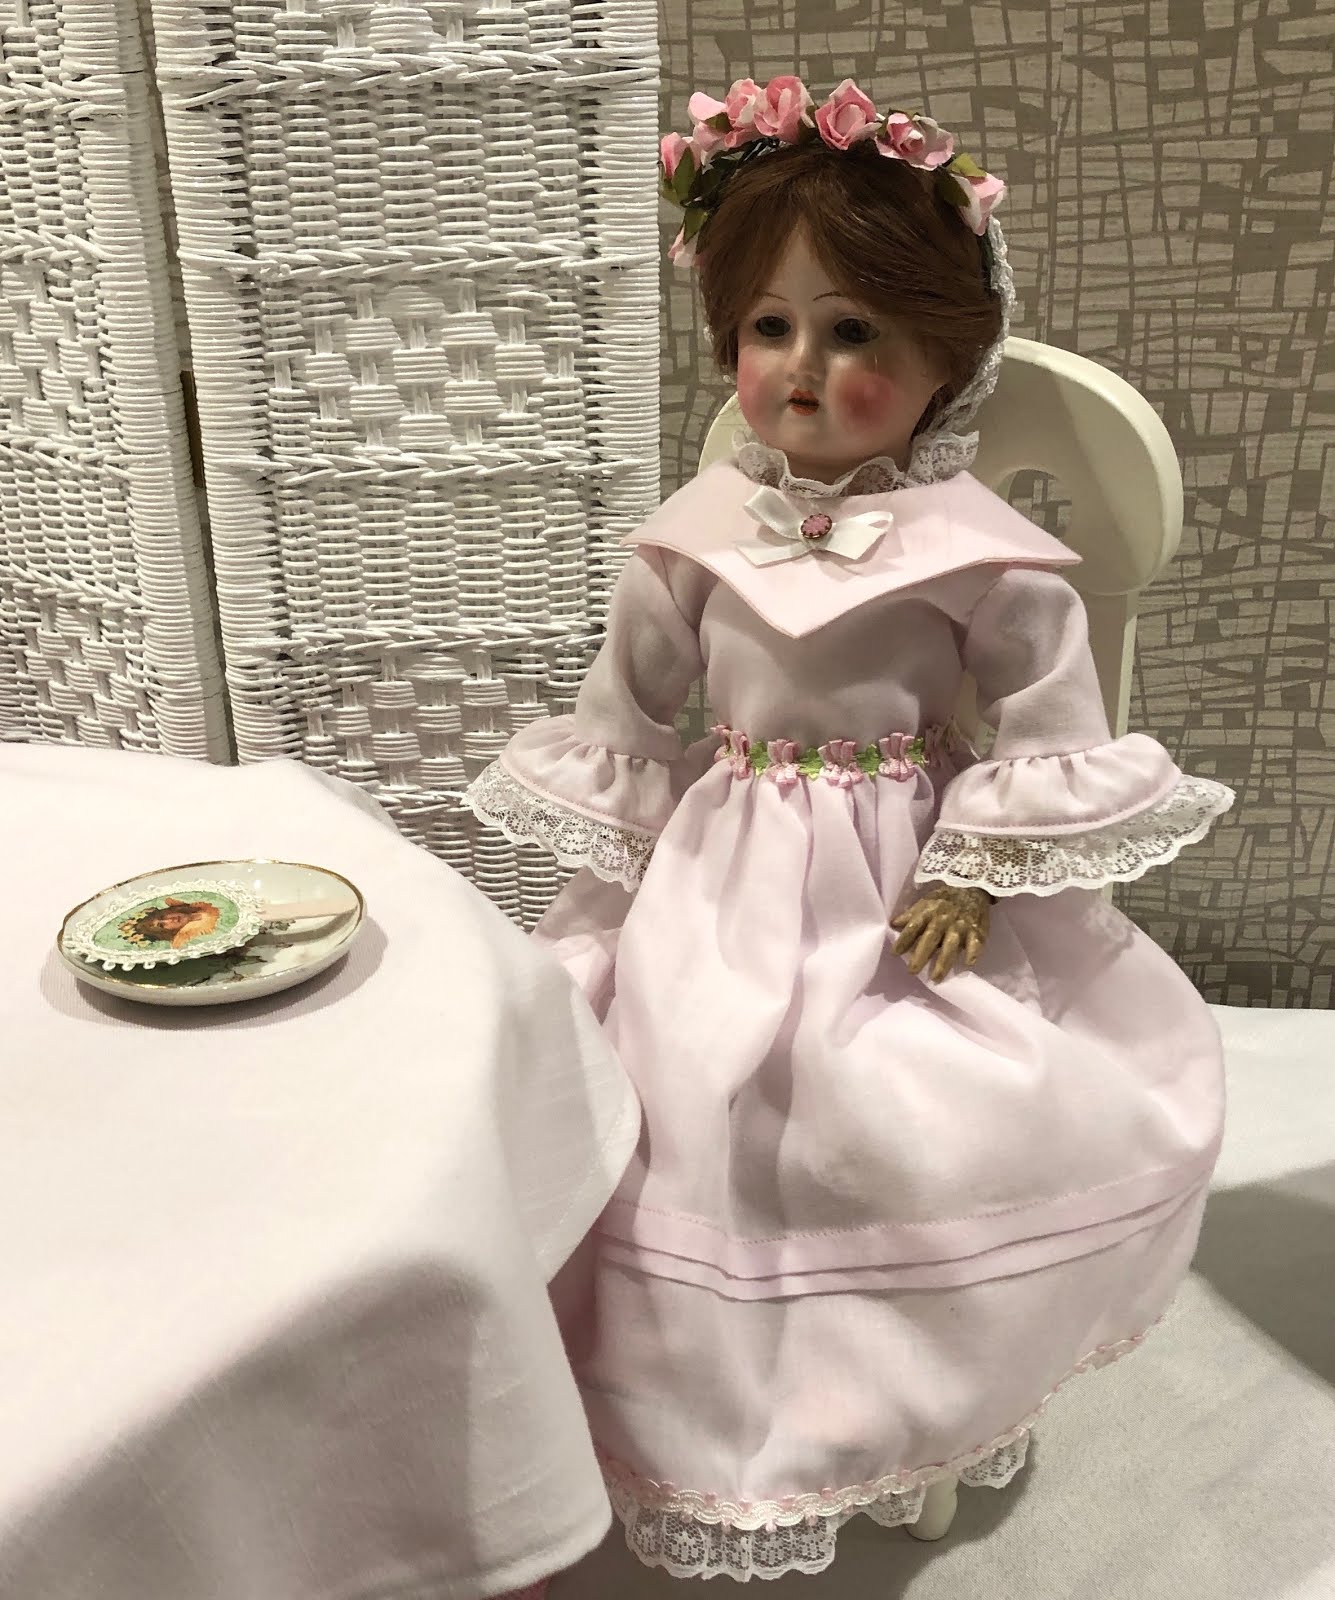 Miss Lily at the Doll Wedding Reception